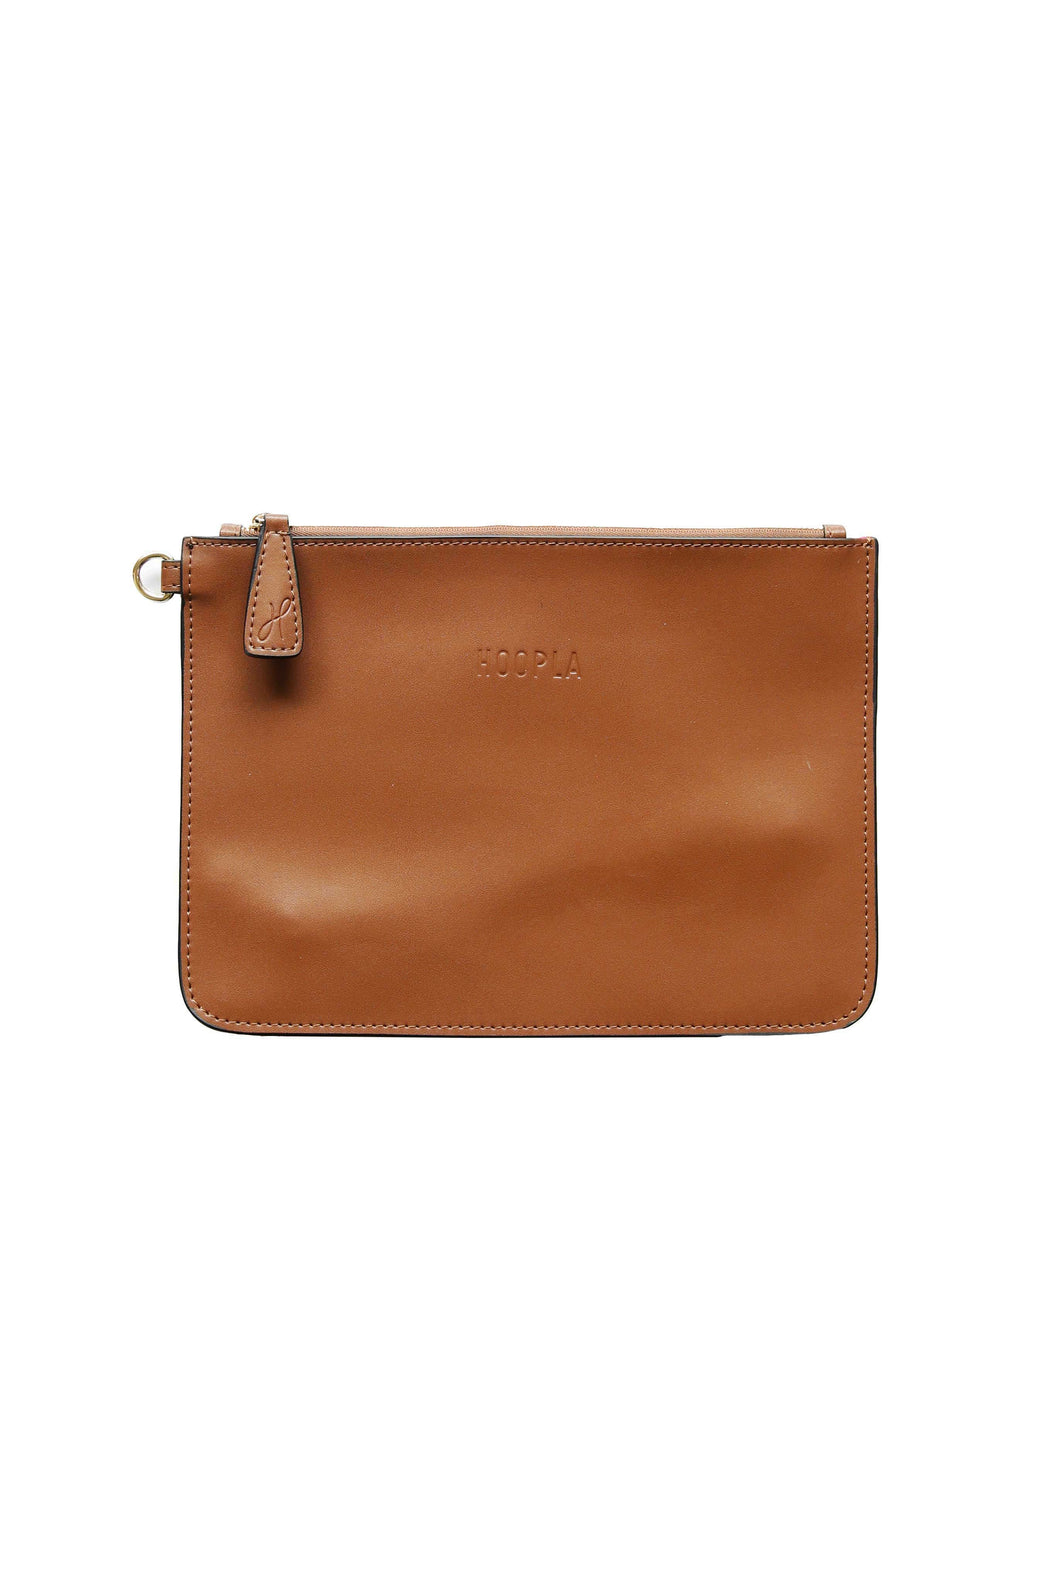 The front of a brown leather clutch with Hoopla brand and  gold zip tag.